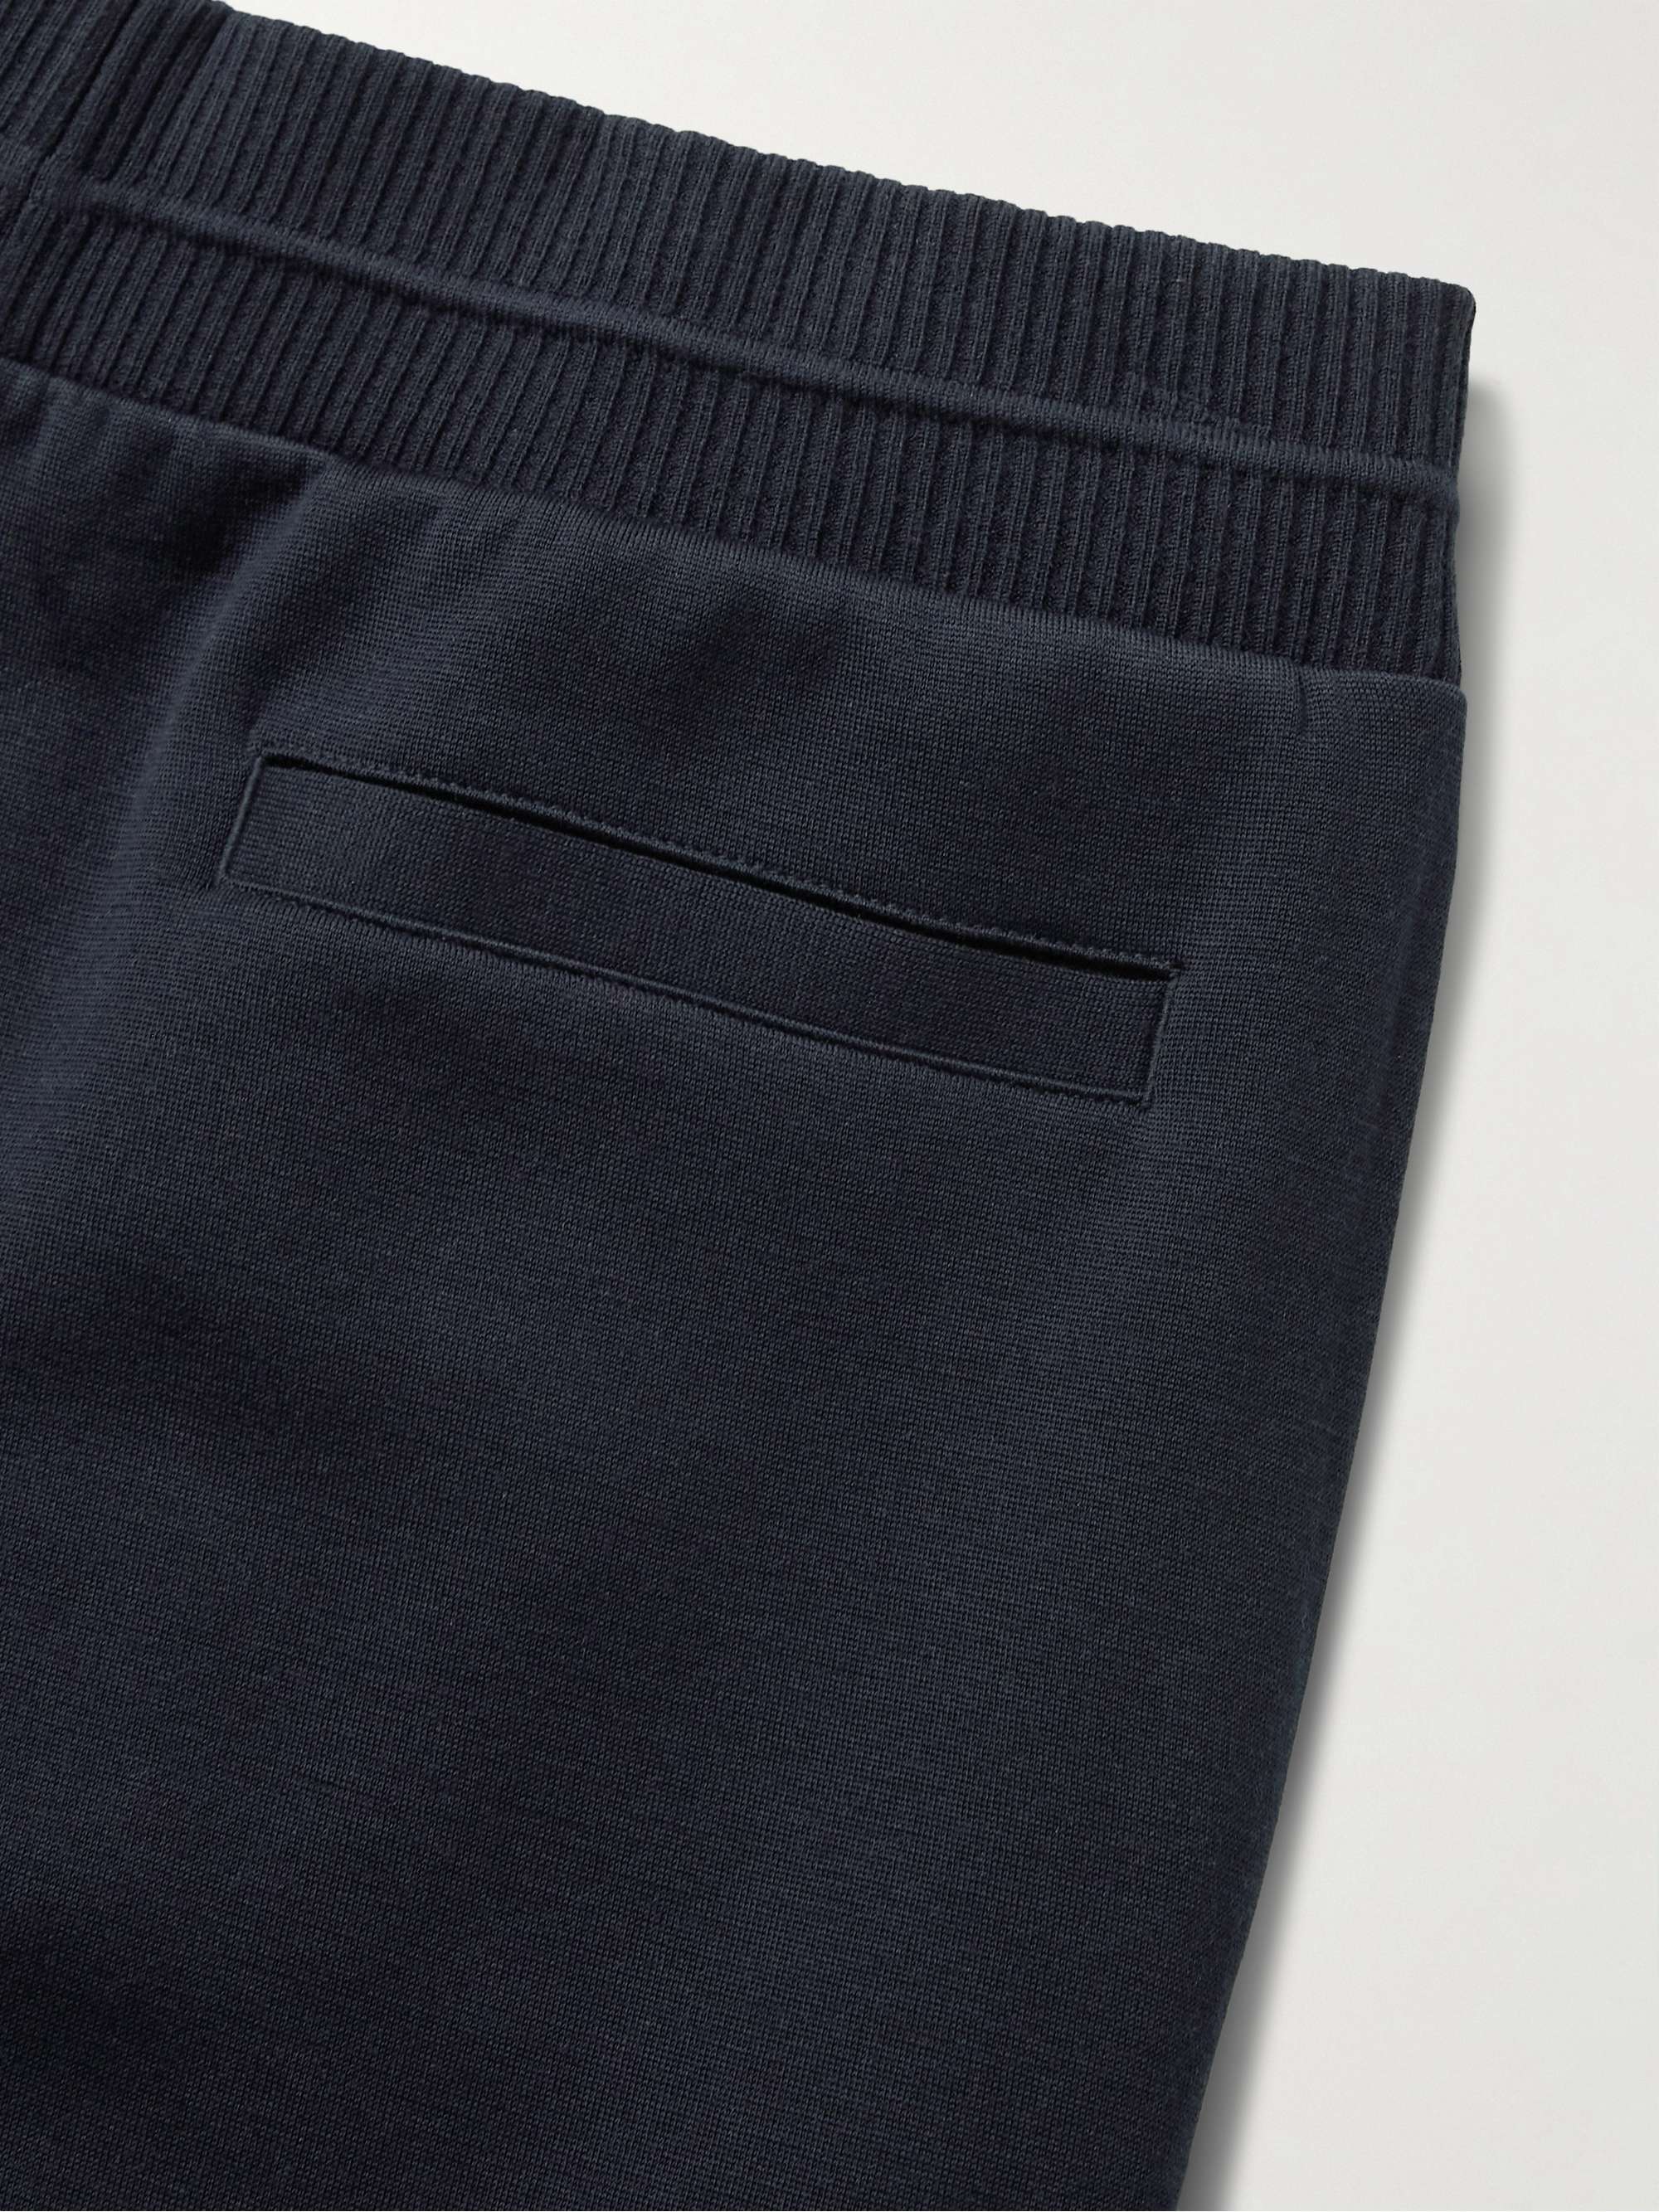 ZEGNA Tapered Jersey Sweatpants